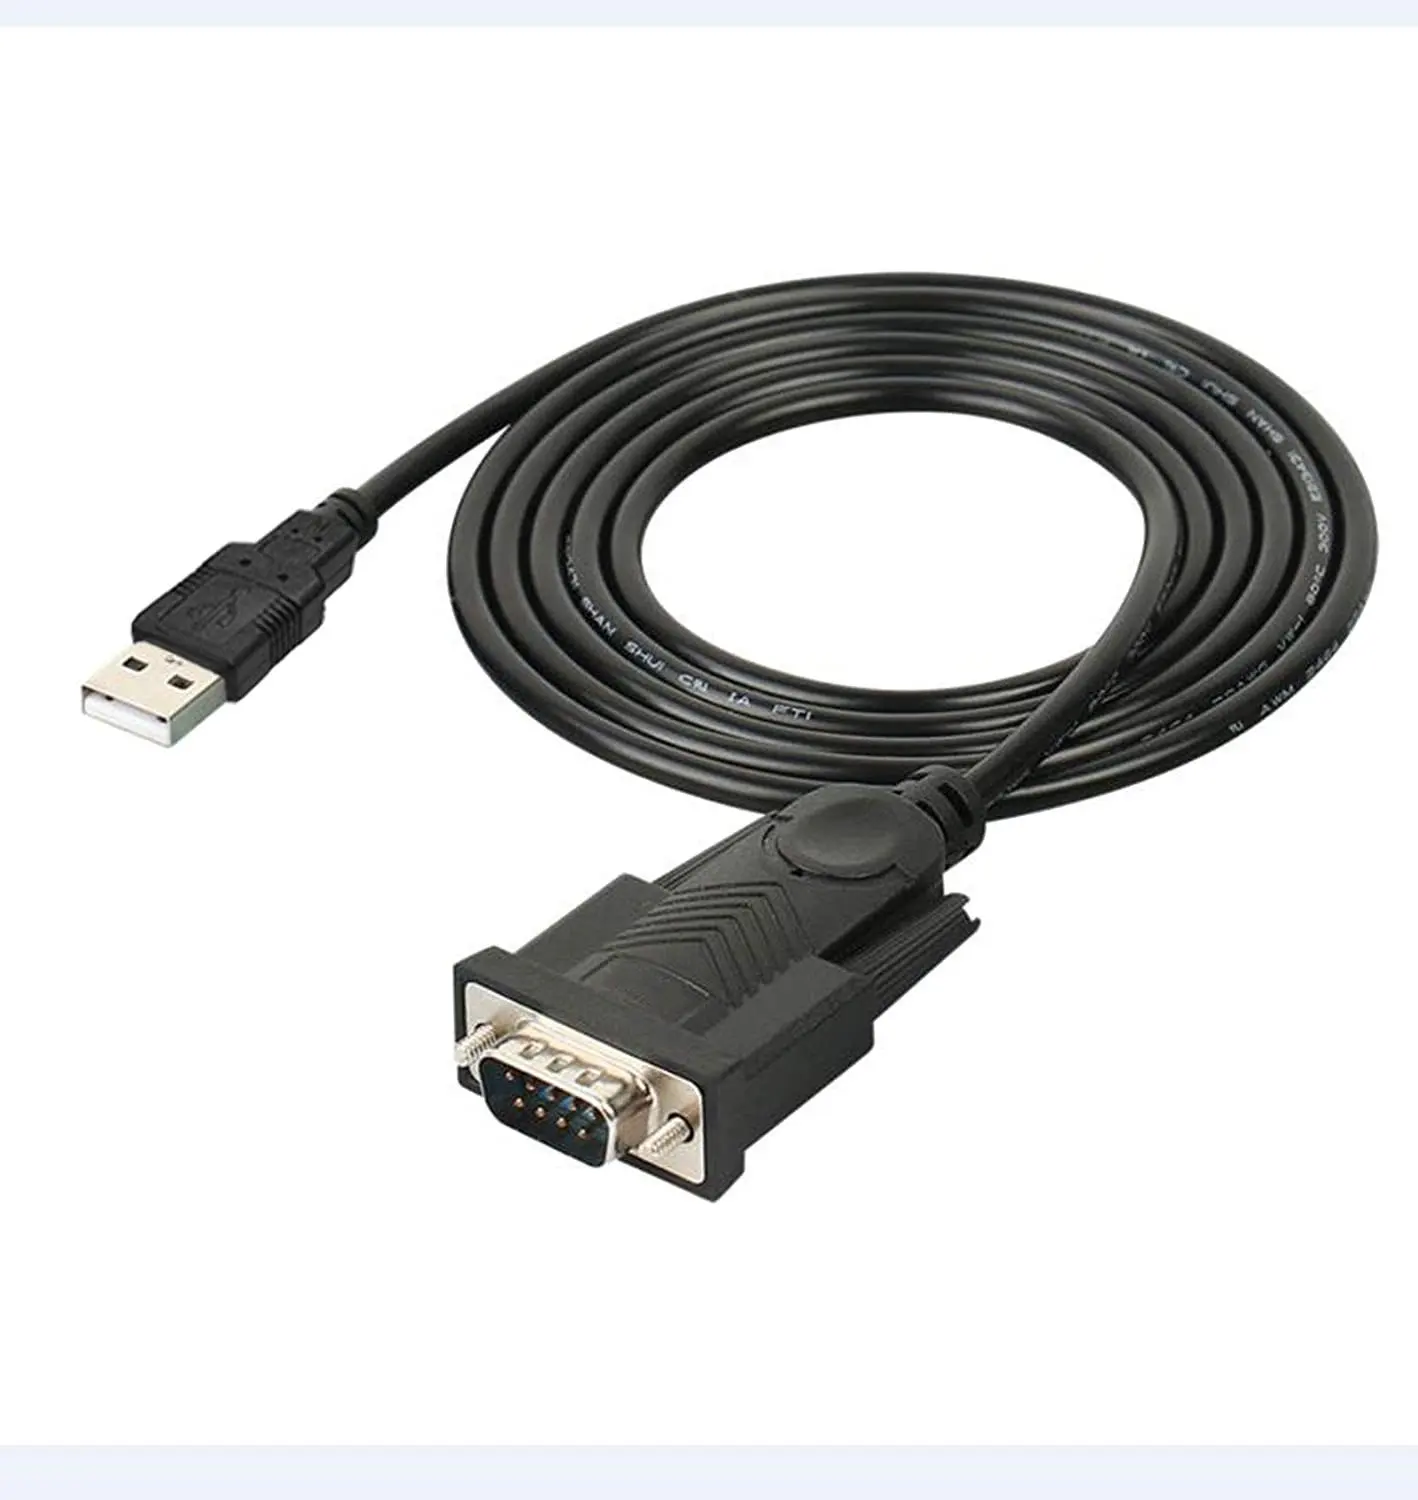 Prolific PL2303 Chip USB to RS232 Serial Adapter Converter USB A Male to DB9 Male RS232 to USB Cable